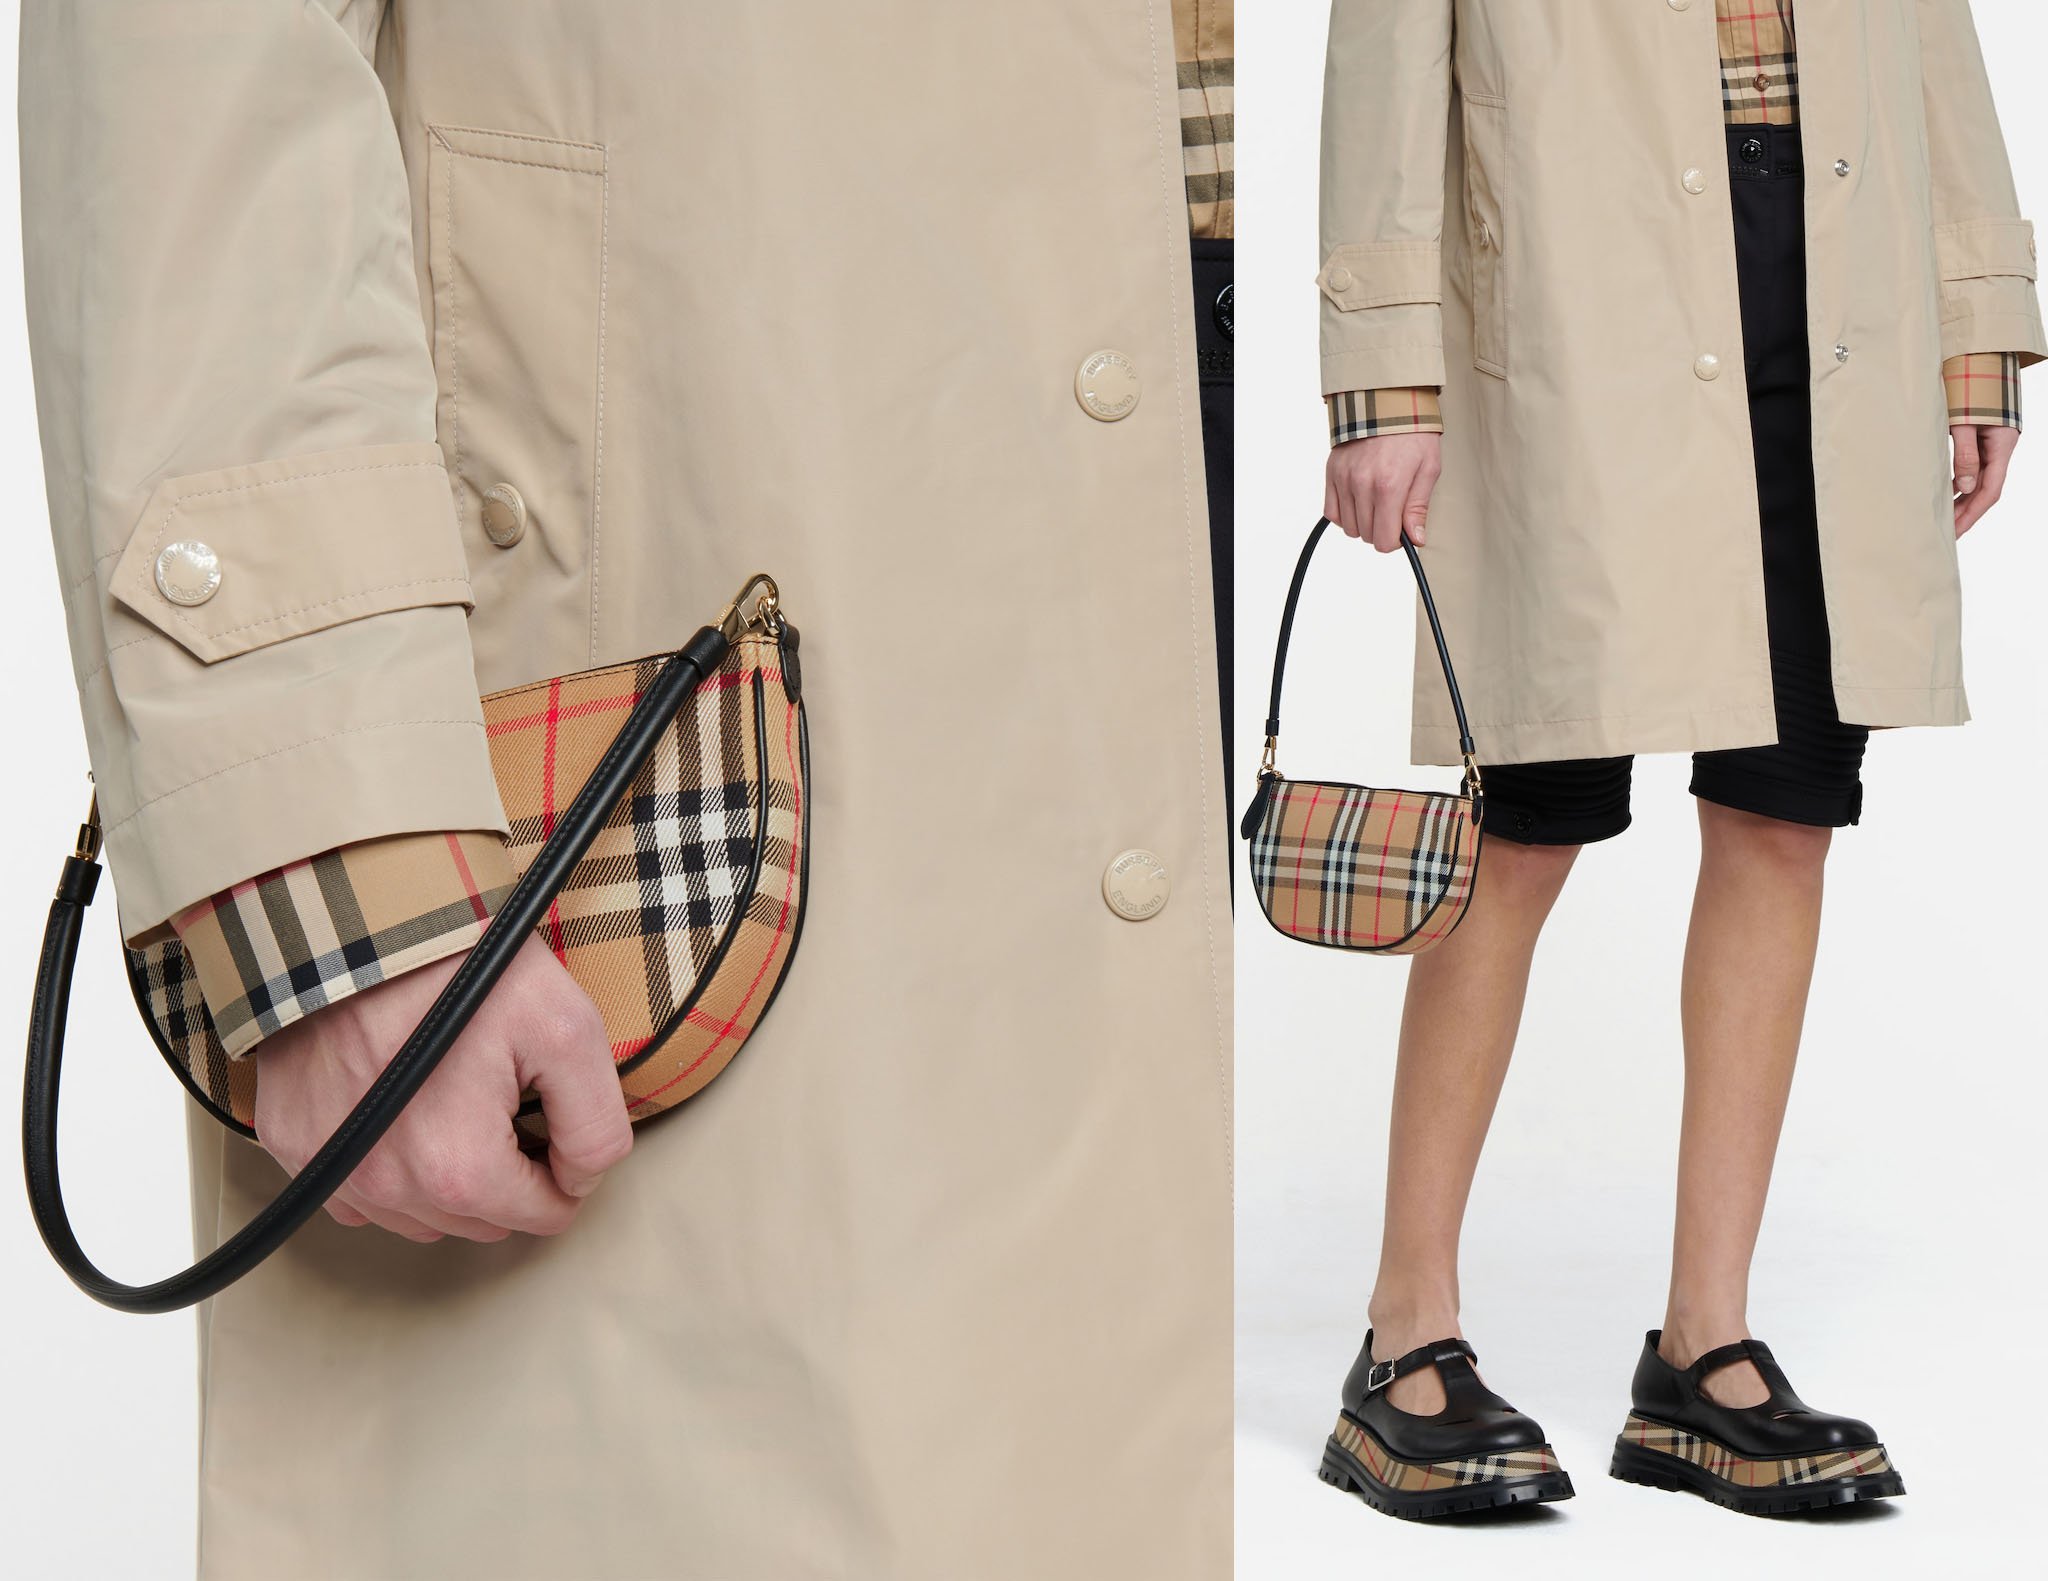 Burberry revives an iconic '90s silhouette in the Olympia bag presented in the house's vintage check pattern, complete with a detachable leather rolled handle